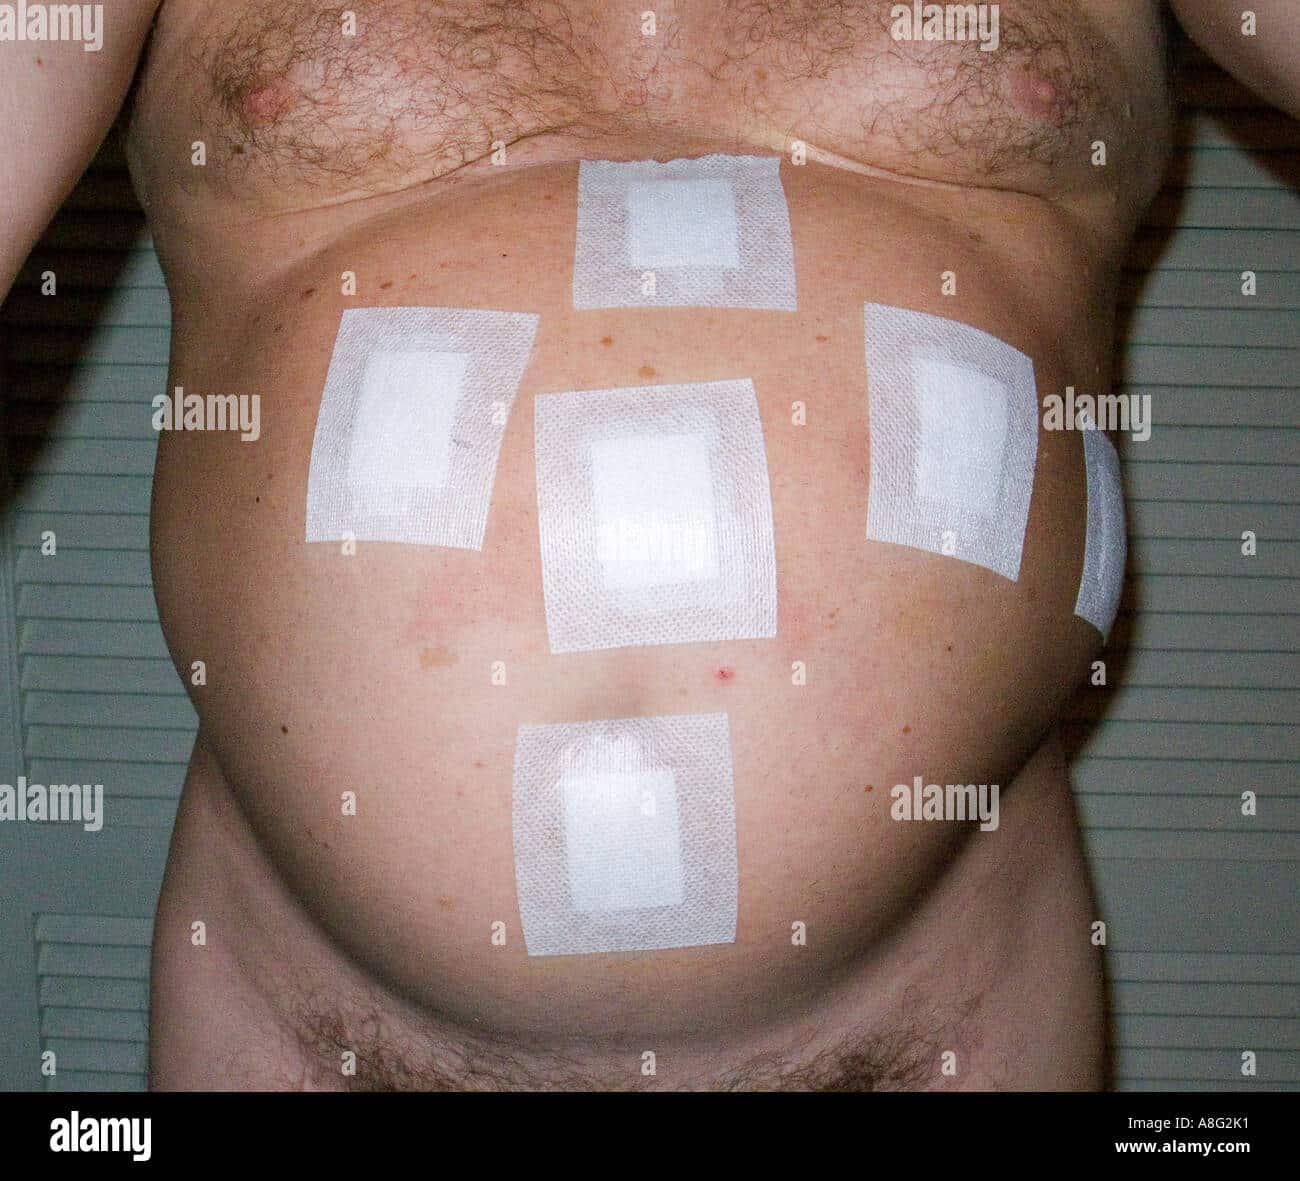 The postoperative distended belly of a man who has undergone Stock ...